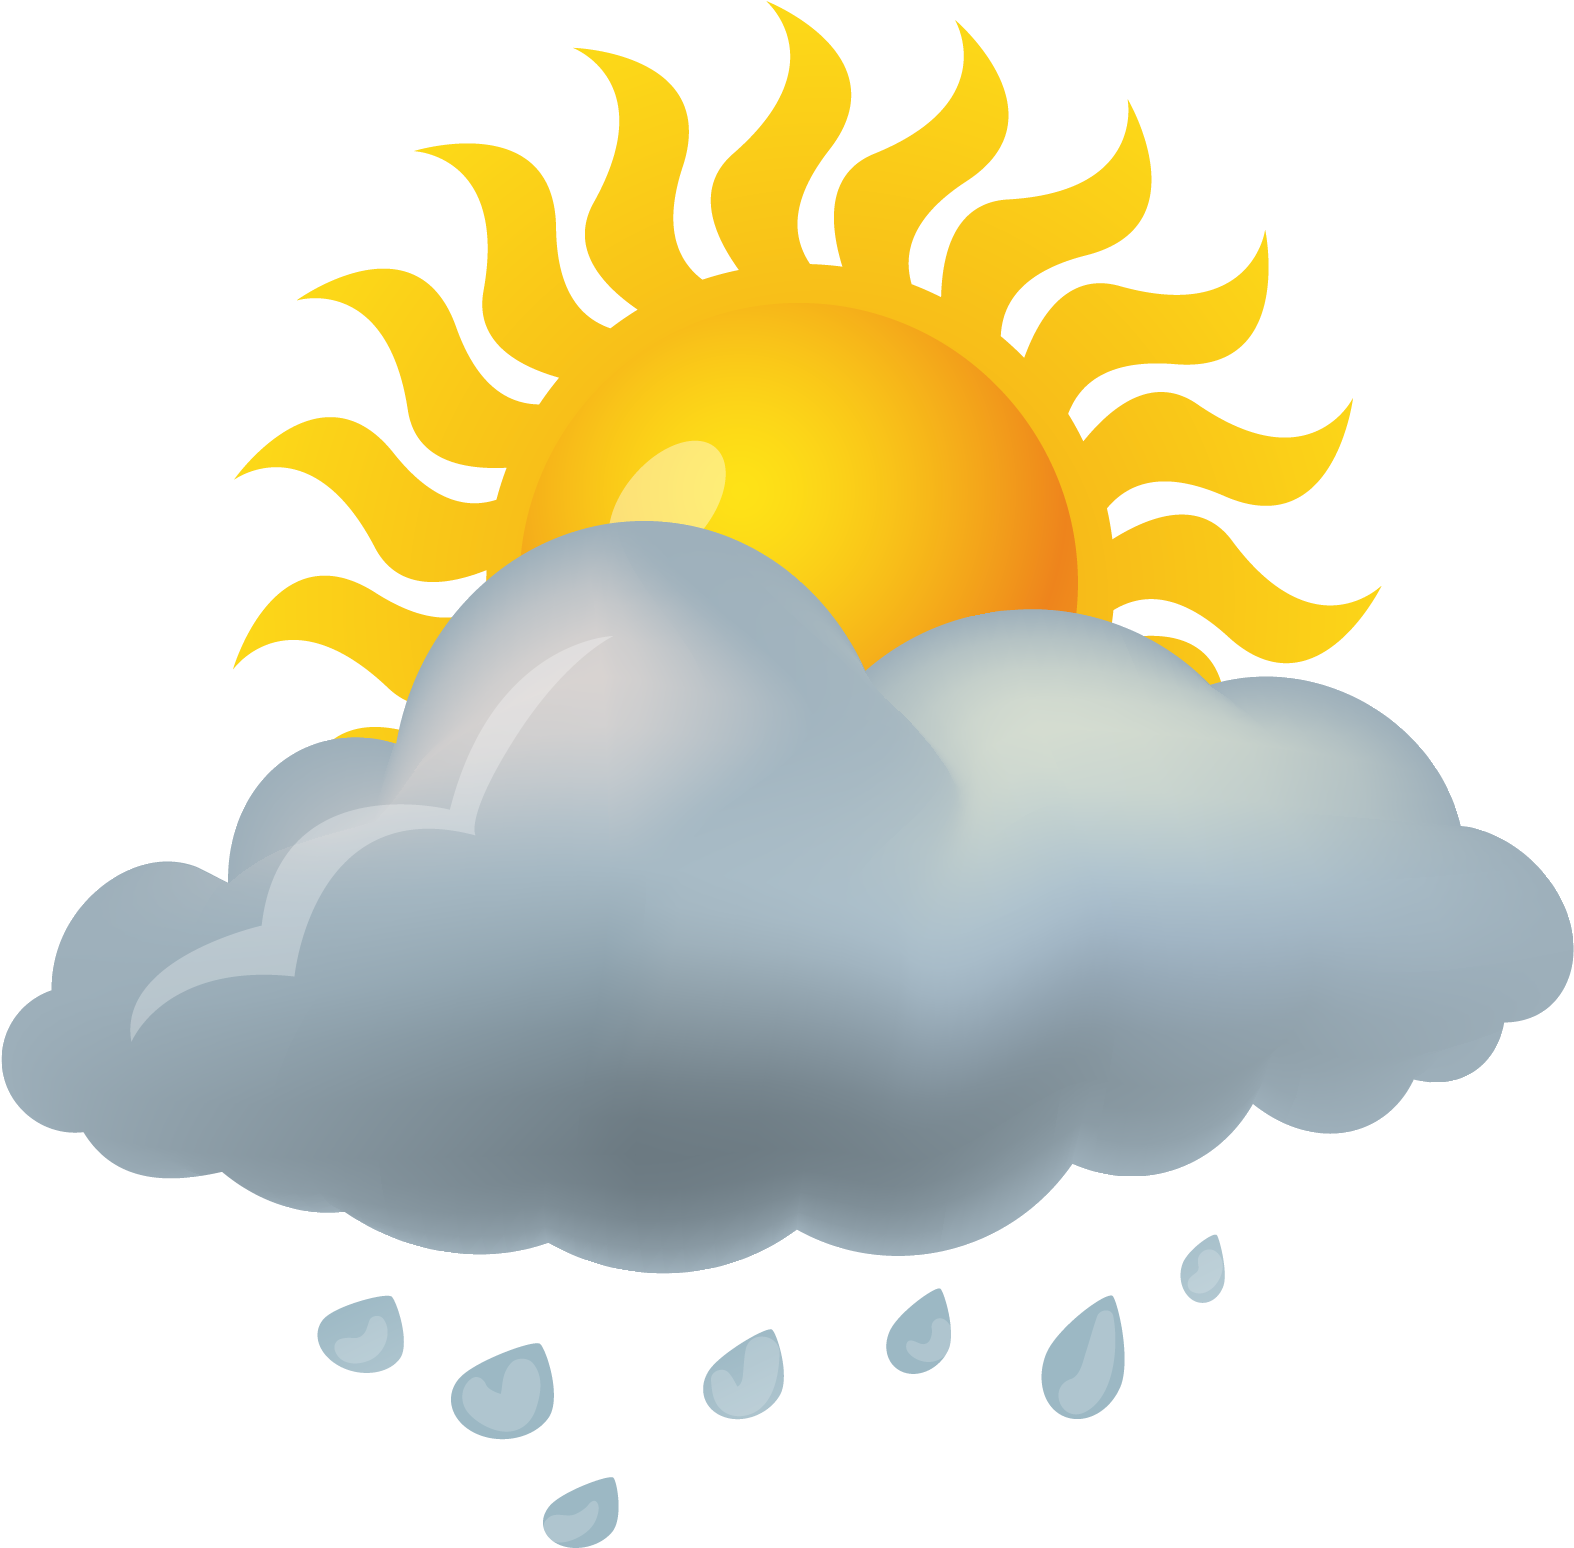 Weather Forecasting Rain Icon - Cloudy Day Clip Art (1667x1667)